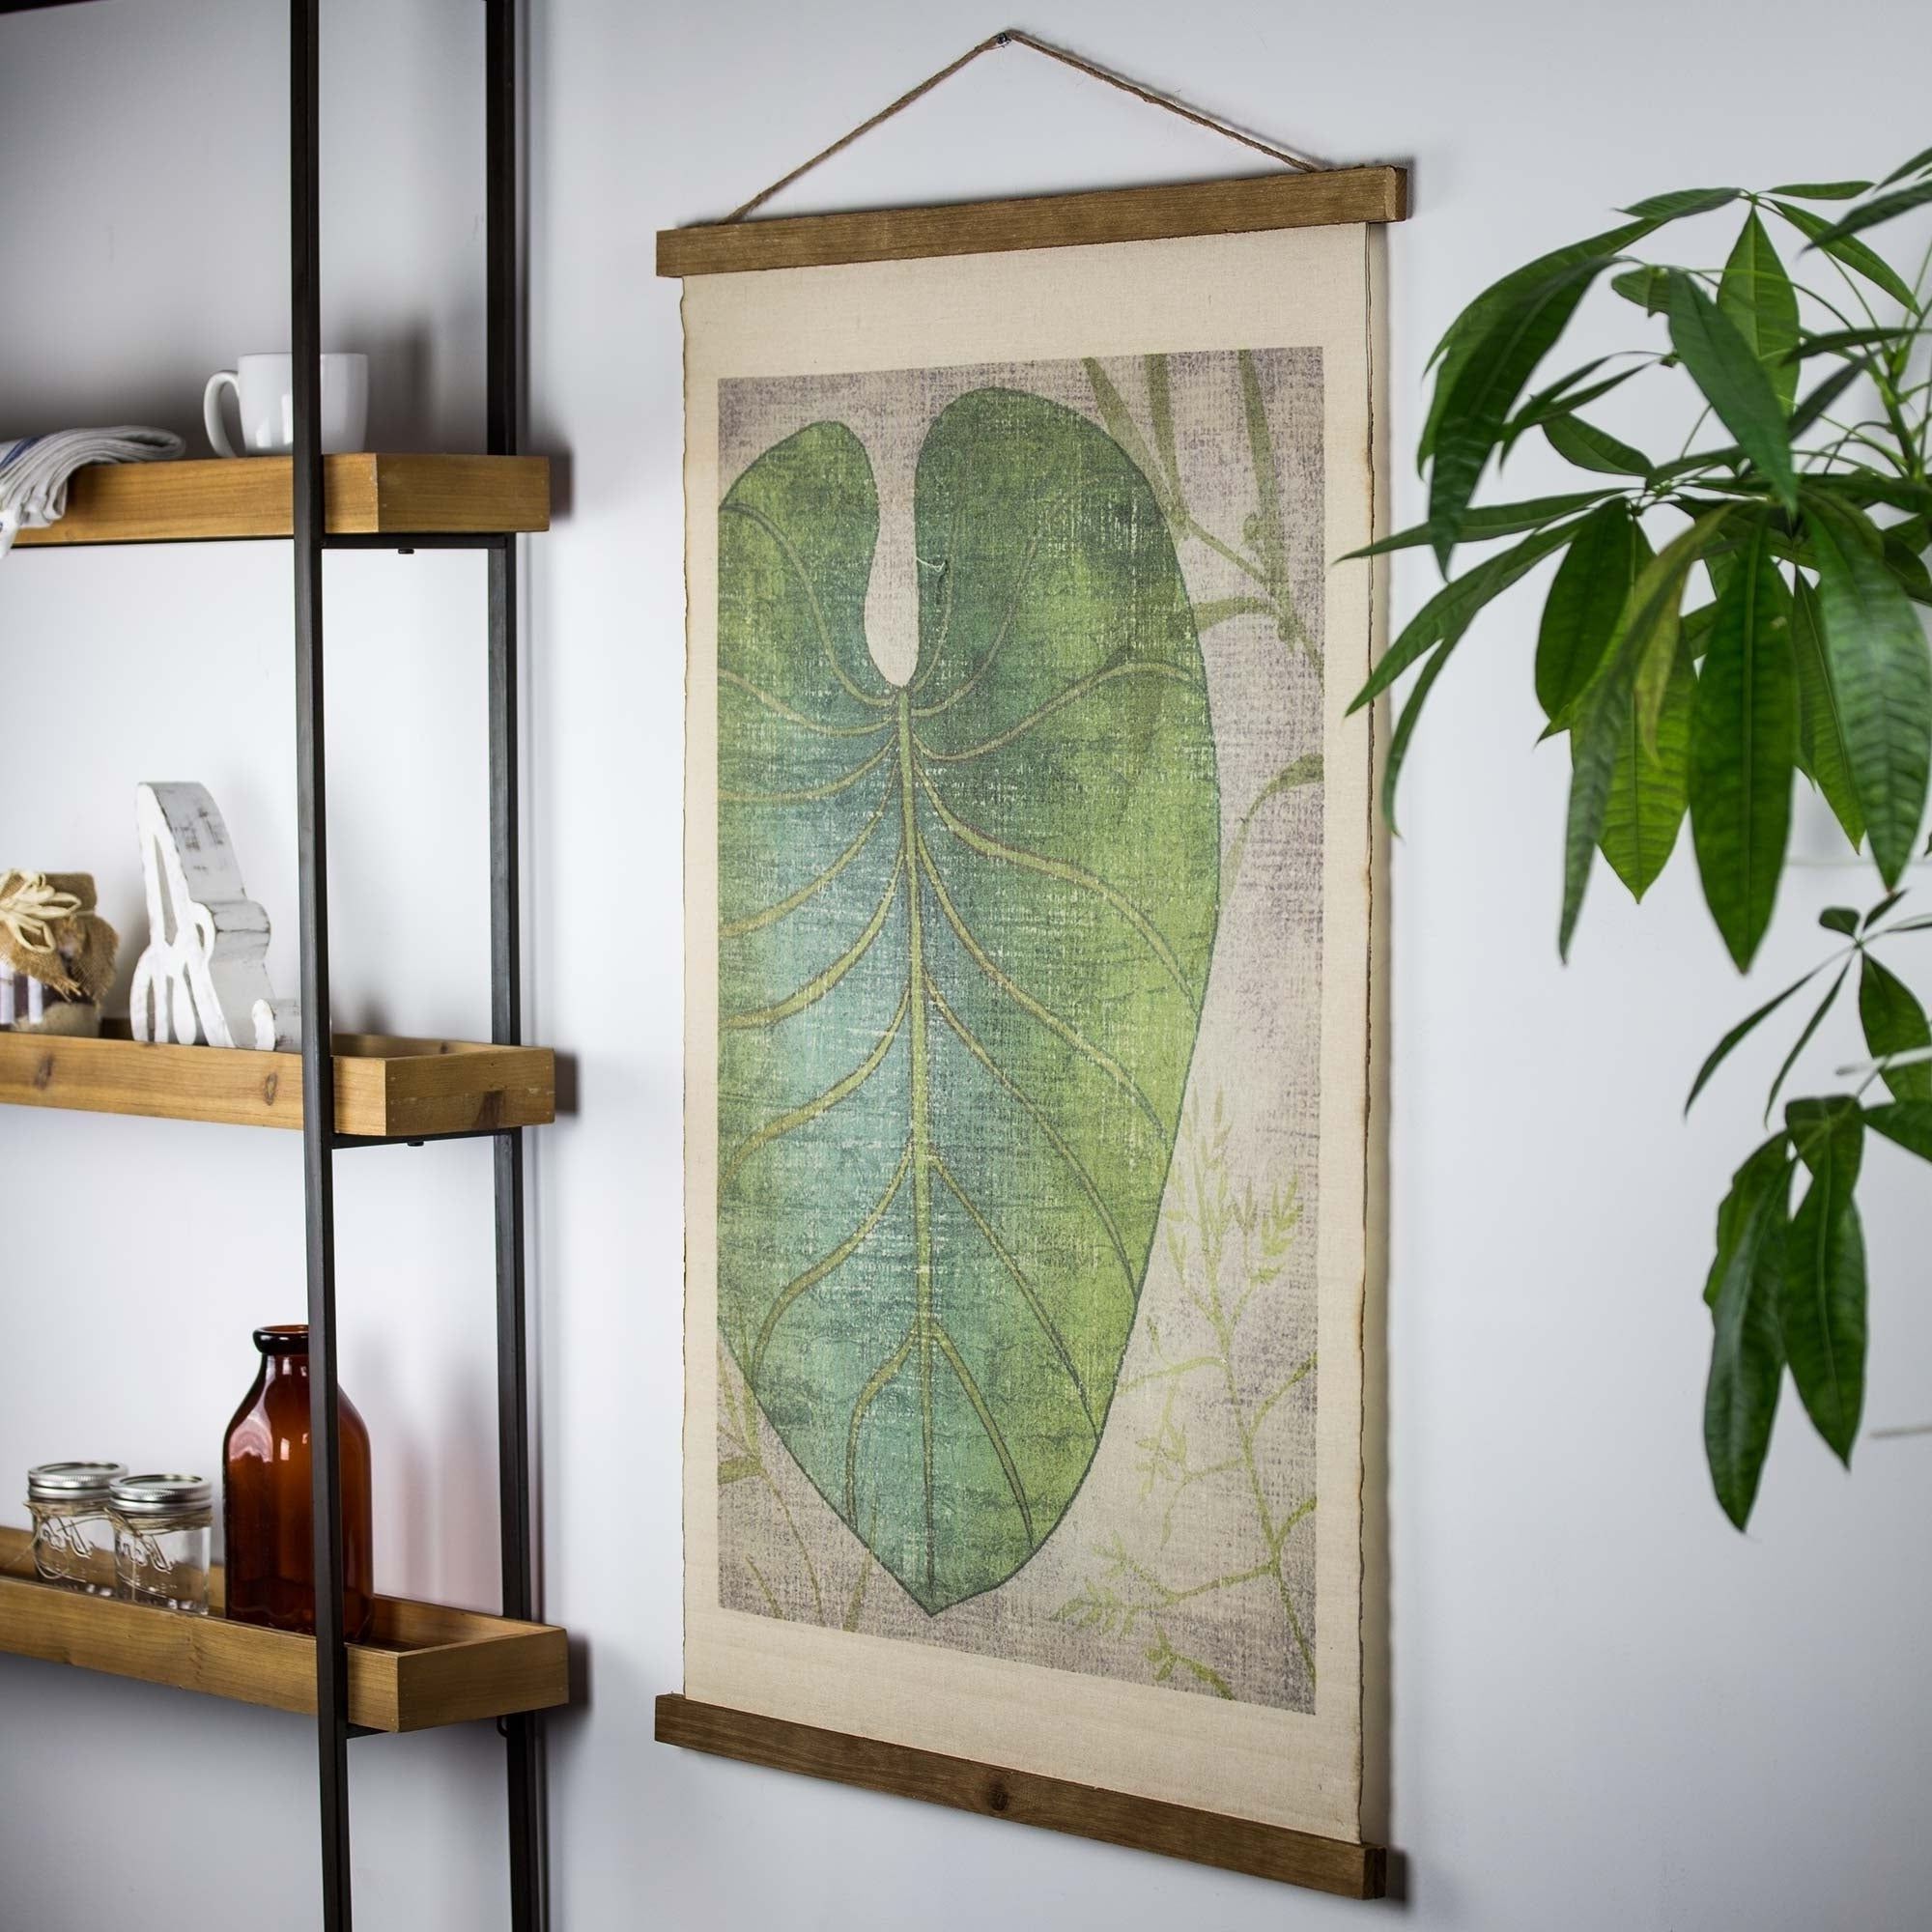 Preferred Shop American Art Decor Leaf Wall Scroll Tapestry With Rope – Free For Scroll Leaf Wall Decor (View 10 of 20)